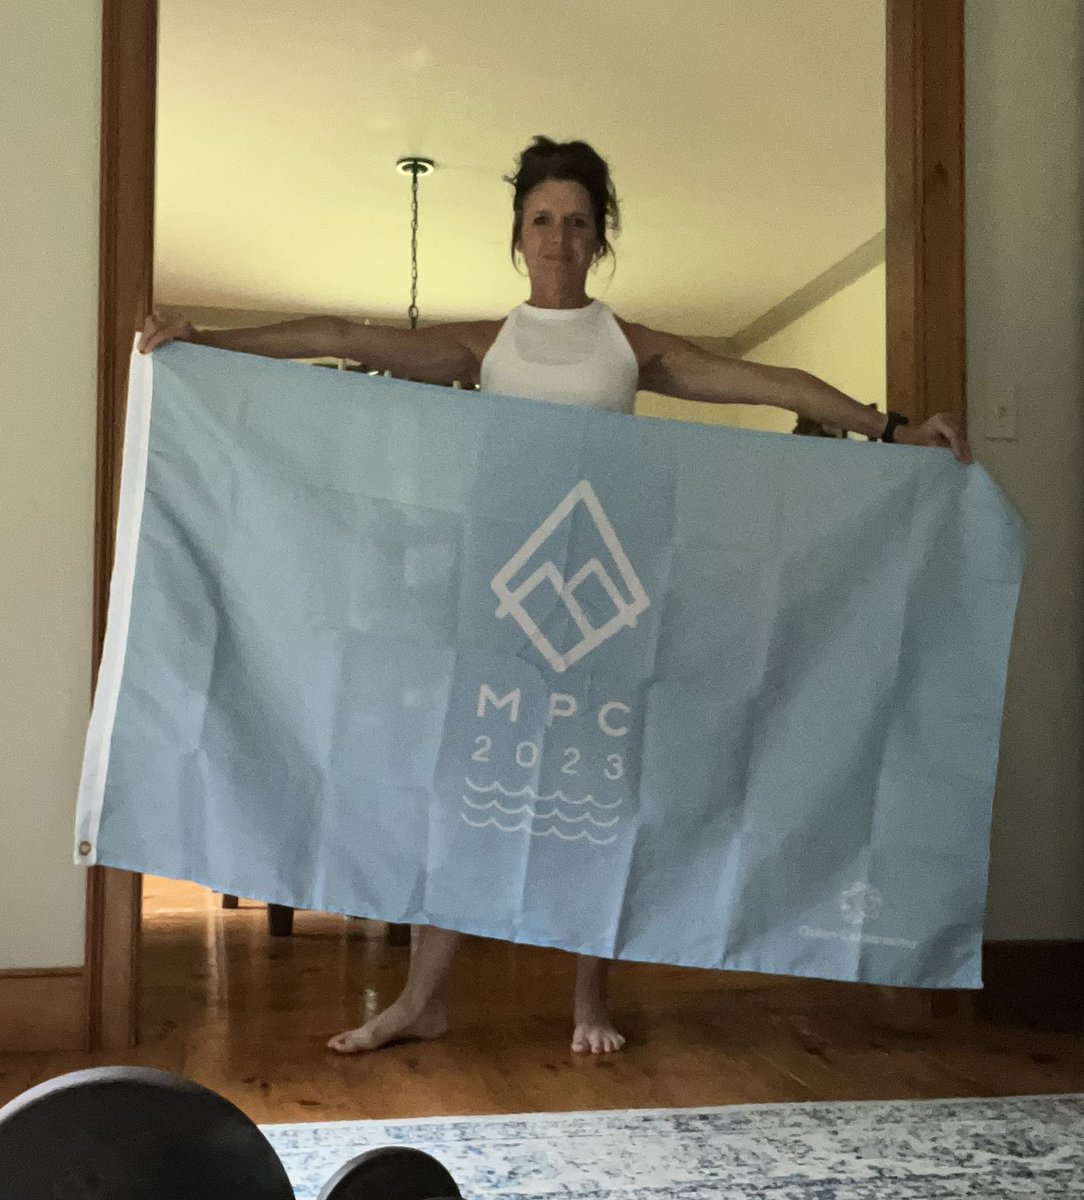 Just went to the mailbox❤️💌❤️😝 It’s a BEAUTY👍👍👍Inspiration and a travel companion all in one! Thank you @MyPeakChallenge @SamHeughan @MountainPeakers @RoadtripPeakers @GreenCoastPeak @HomeGymPeakers @CampingPeakers